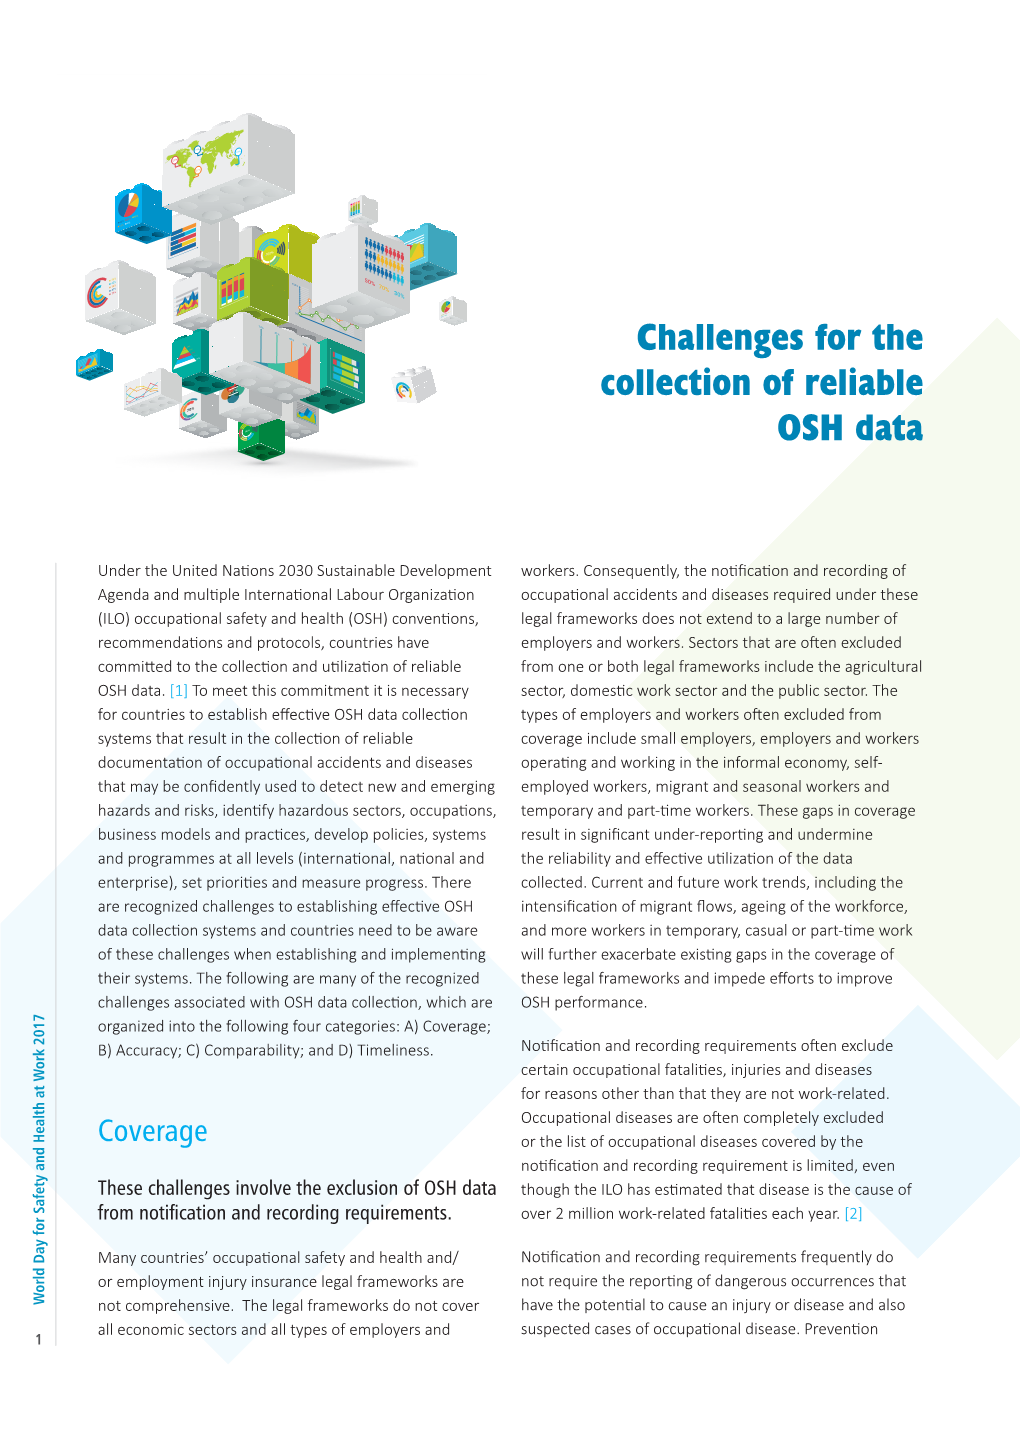 Challenges for the Collection of Reliable OSH Data